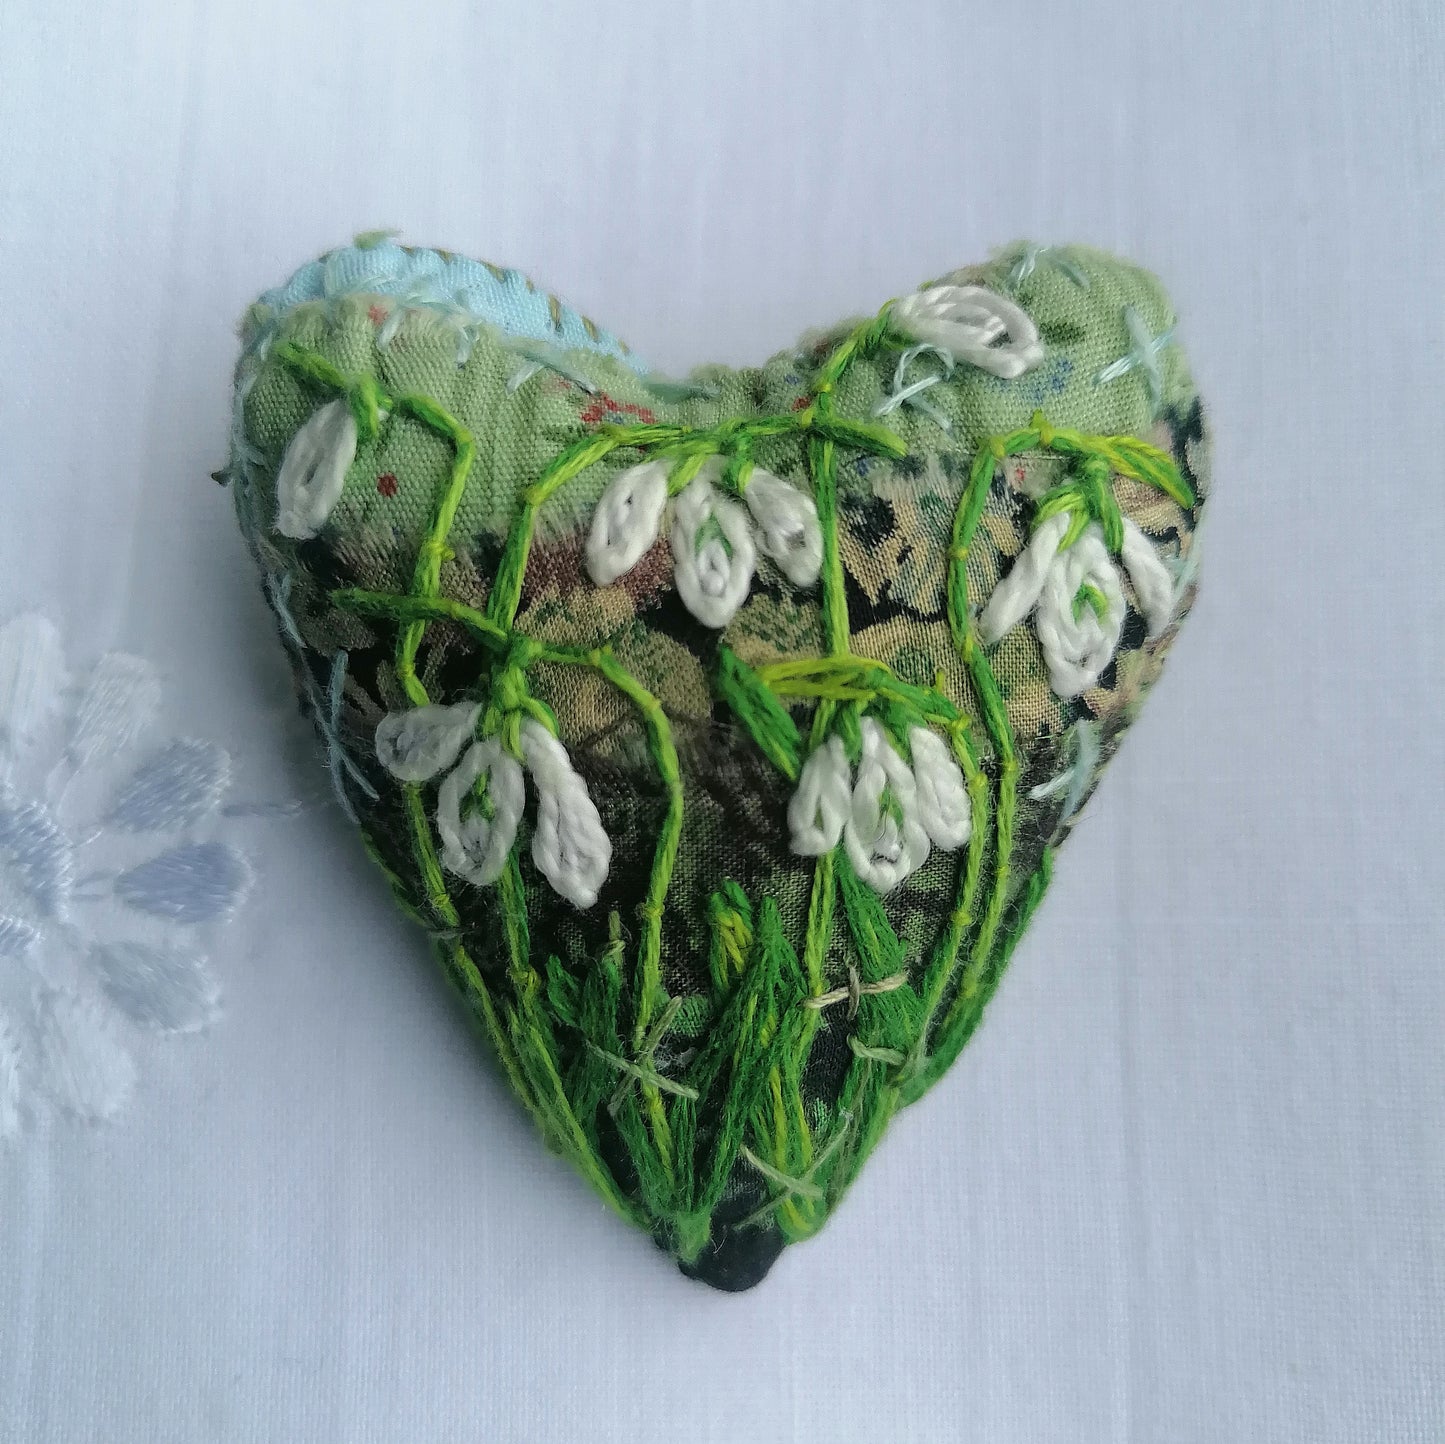 Stitched SNOWDROP Heart Brooches